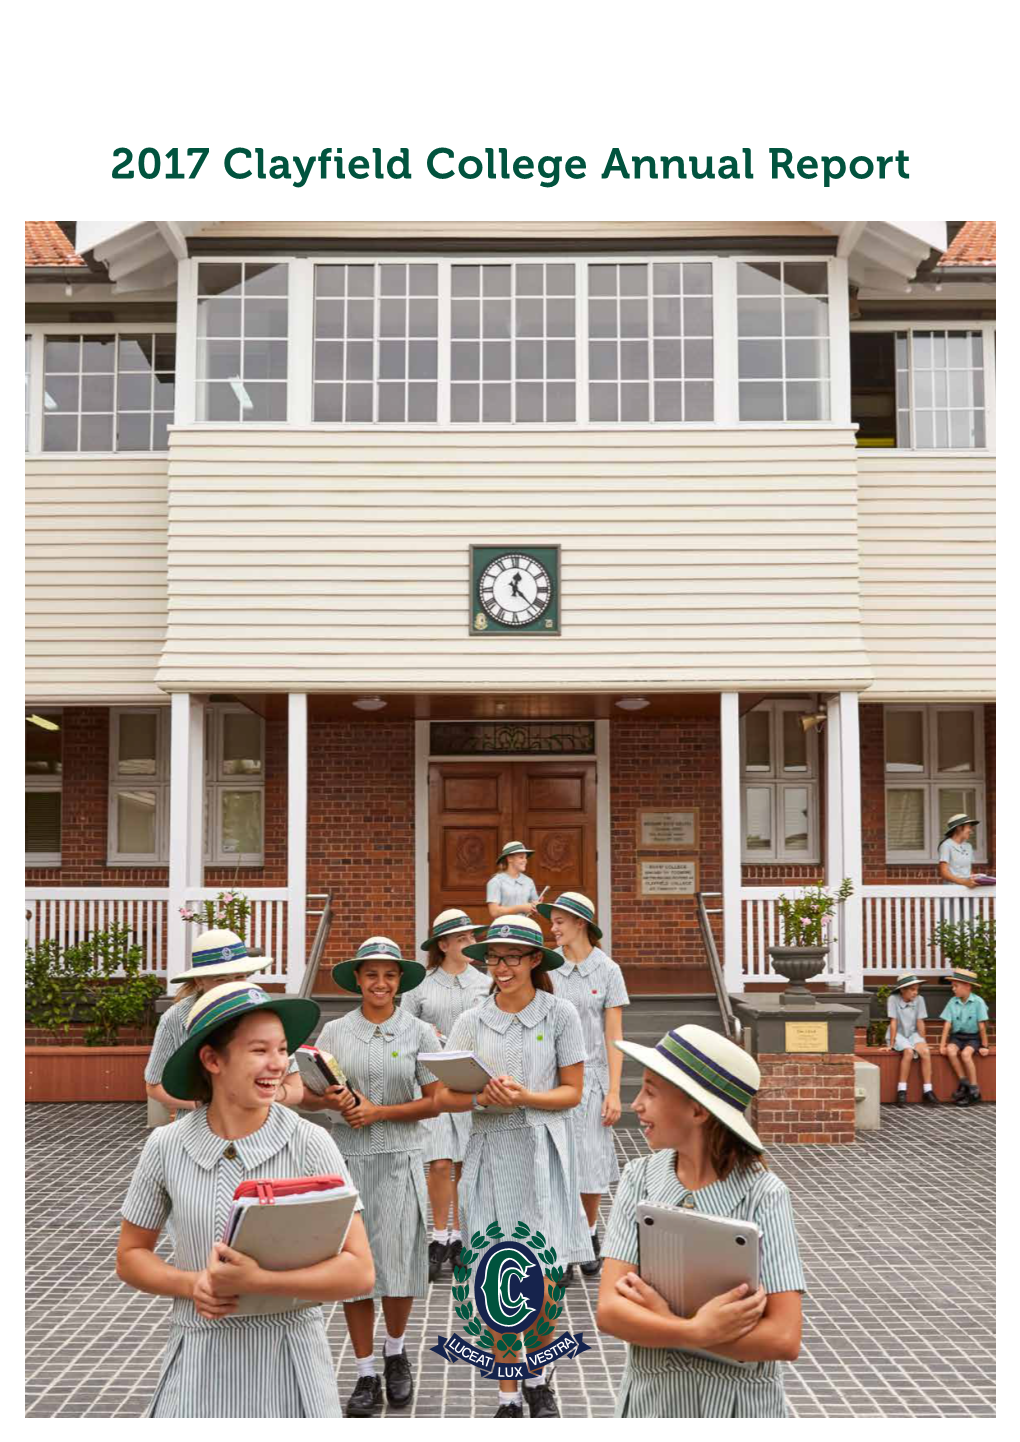 2017 Clayfield College Annual Report 2017 ANNUAL REPORT